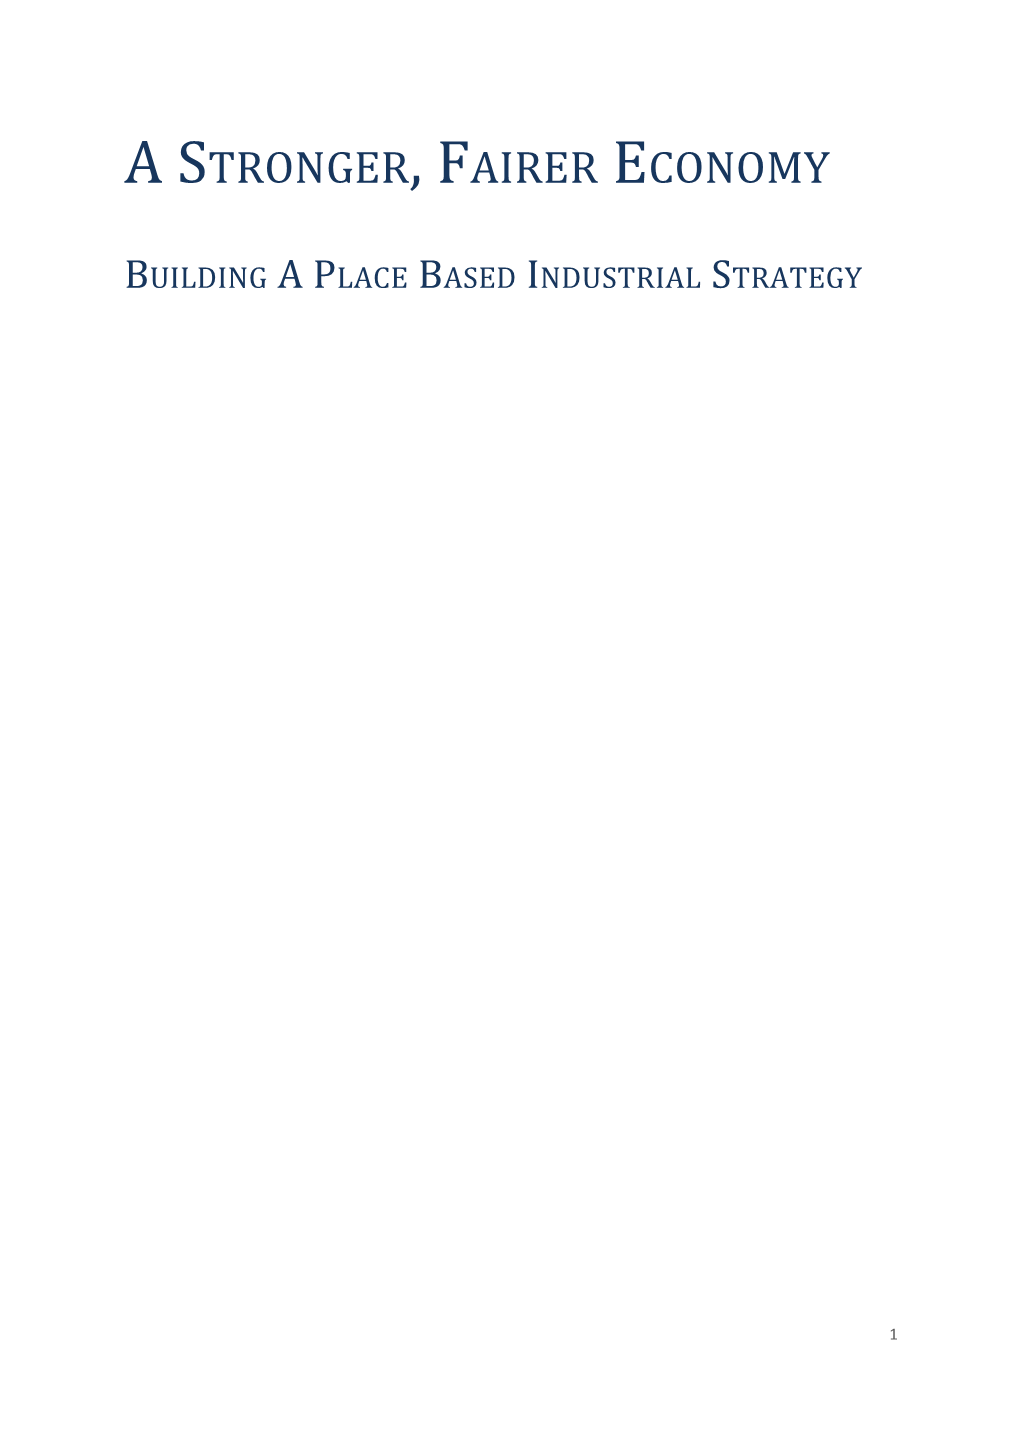 Building a Place Based Industrial Strategy